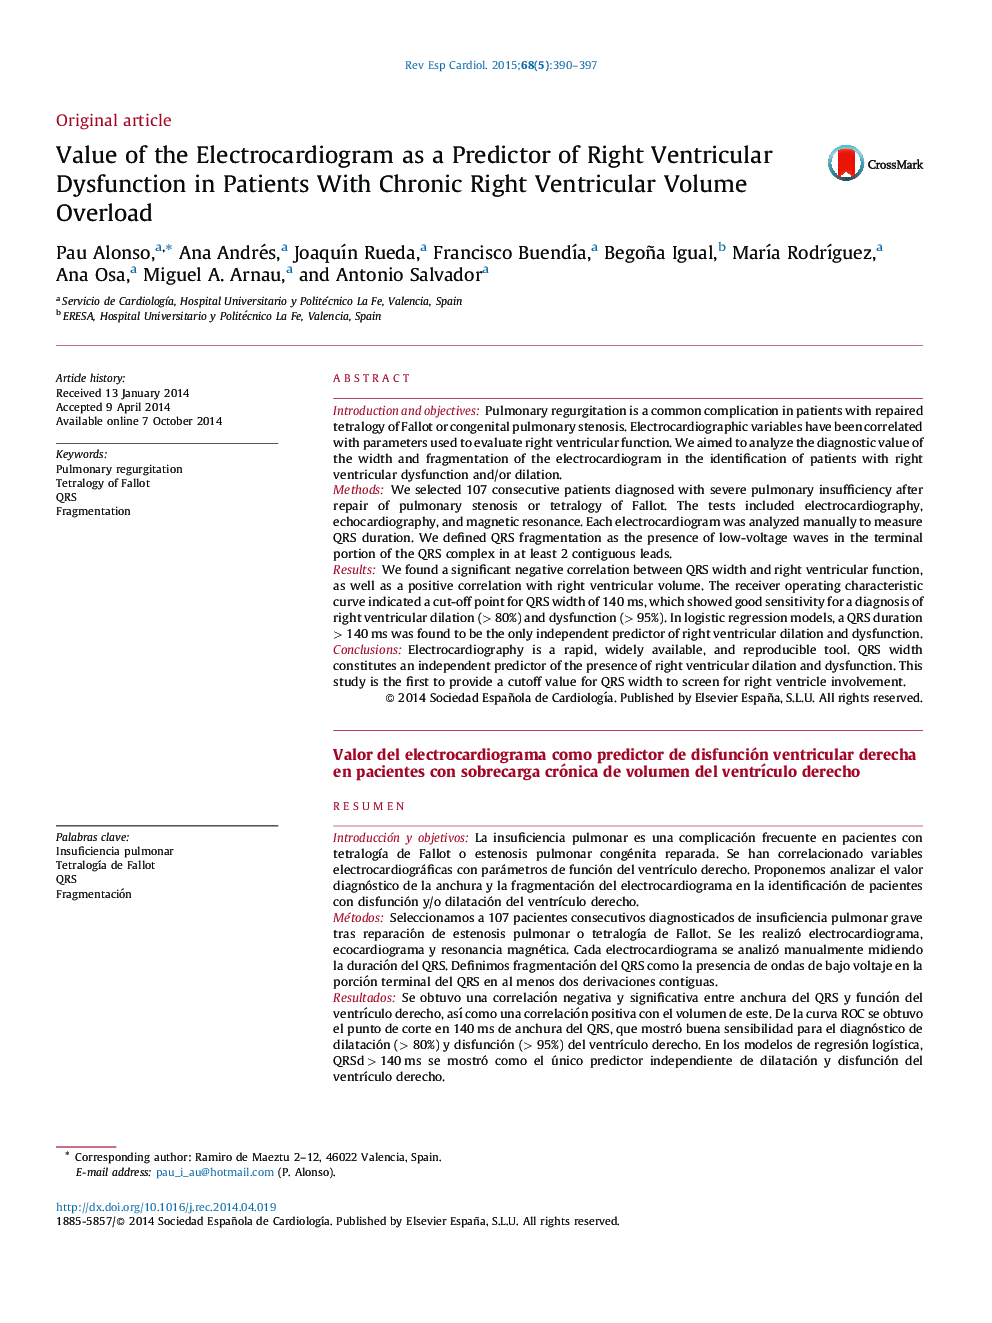 Value of the Electrocardiogram as a Predictor of Right Ventricular Dysfunction in Patients With Chronic Right Ventricular Volume Overload